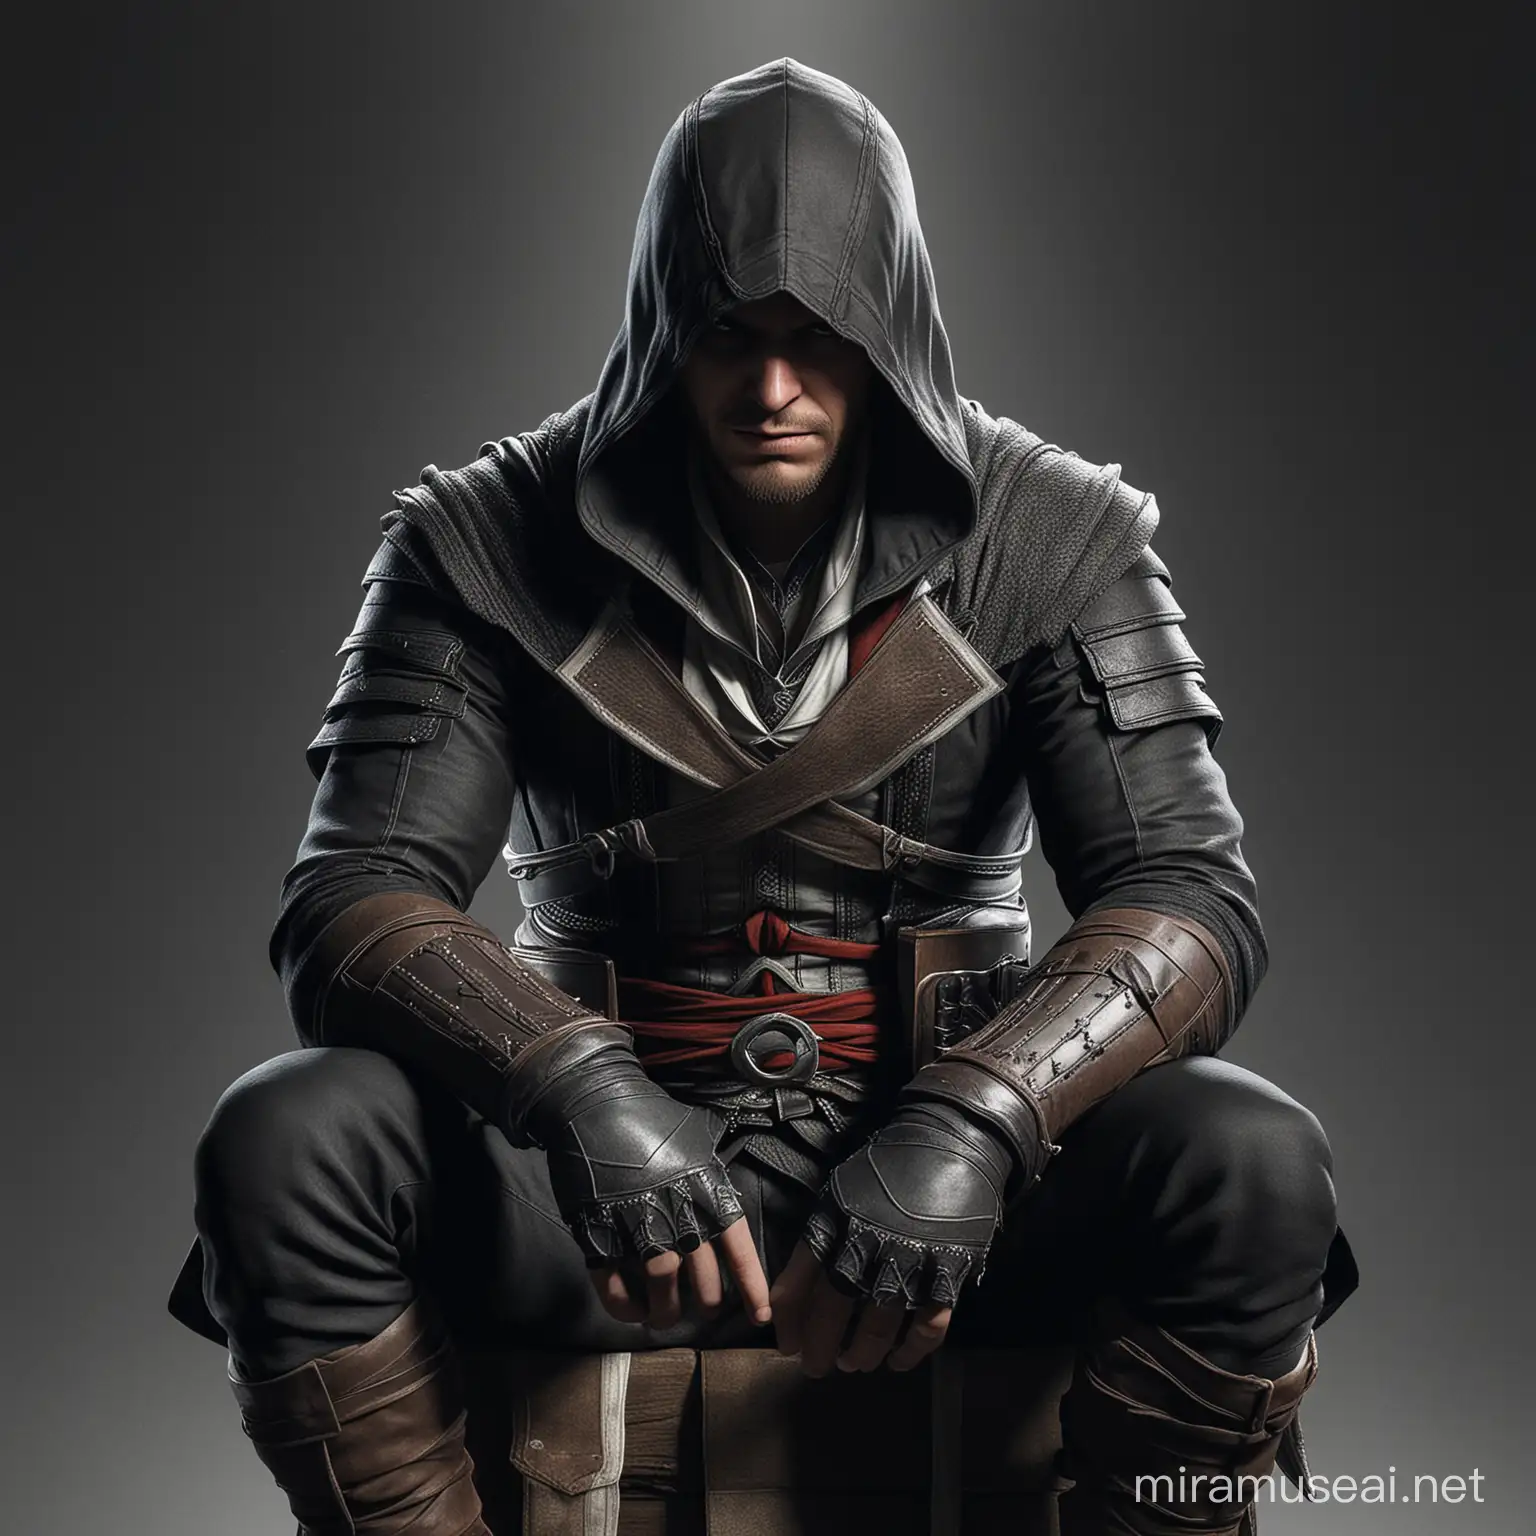 Assassin's creed black outfit guy sitting facing front